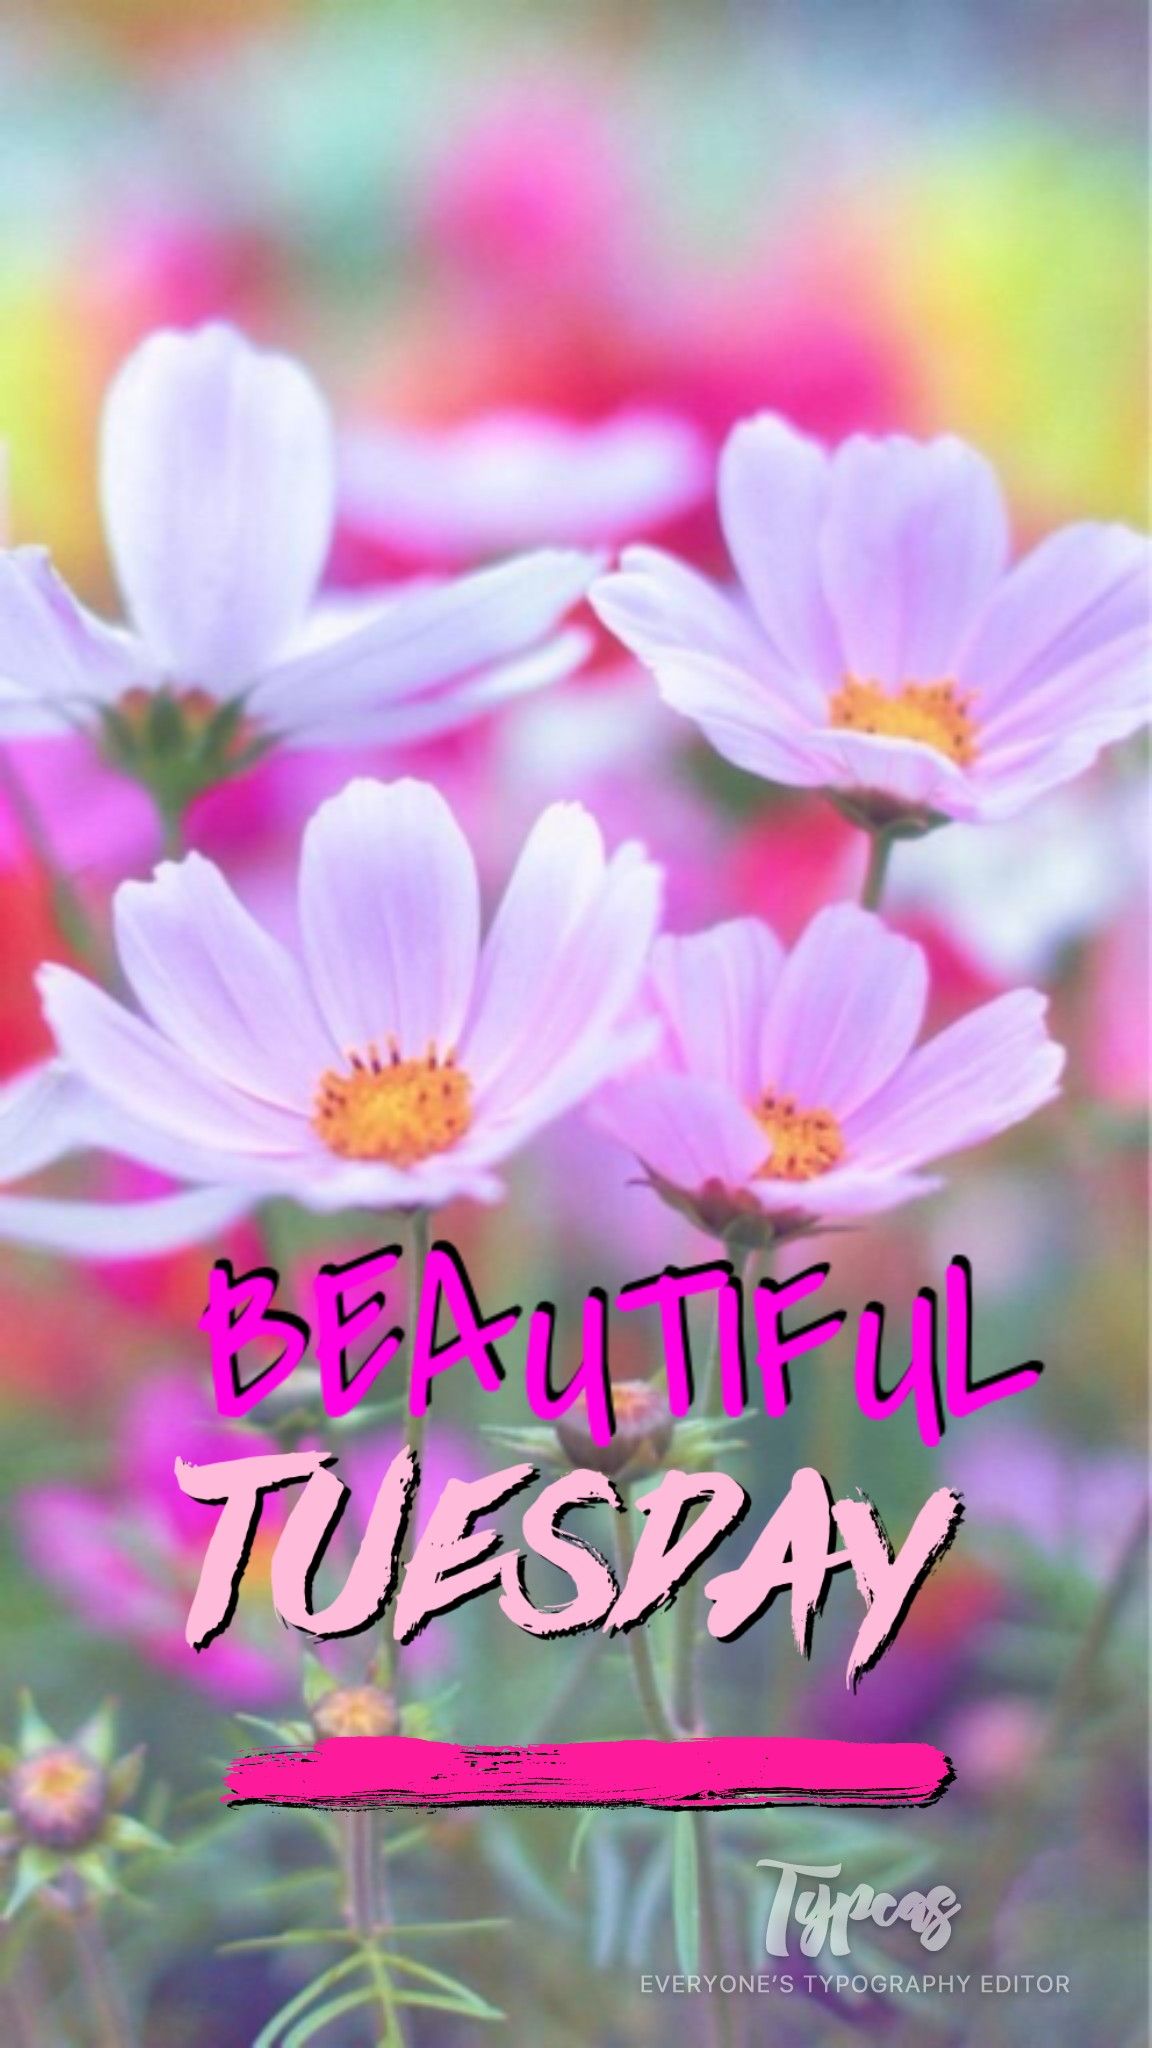 Happy Tuesday Images | Free Photos, PNG Stickers, Wallpapers & Backgrounds  - rawpixel